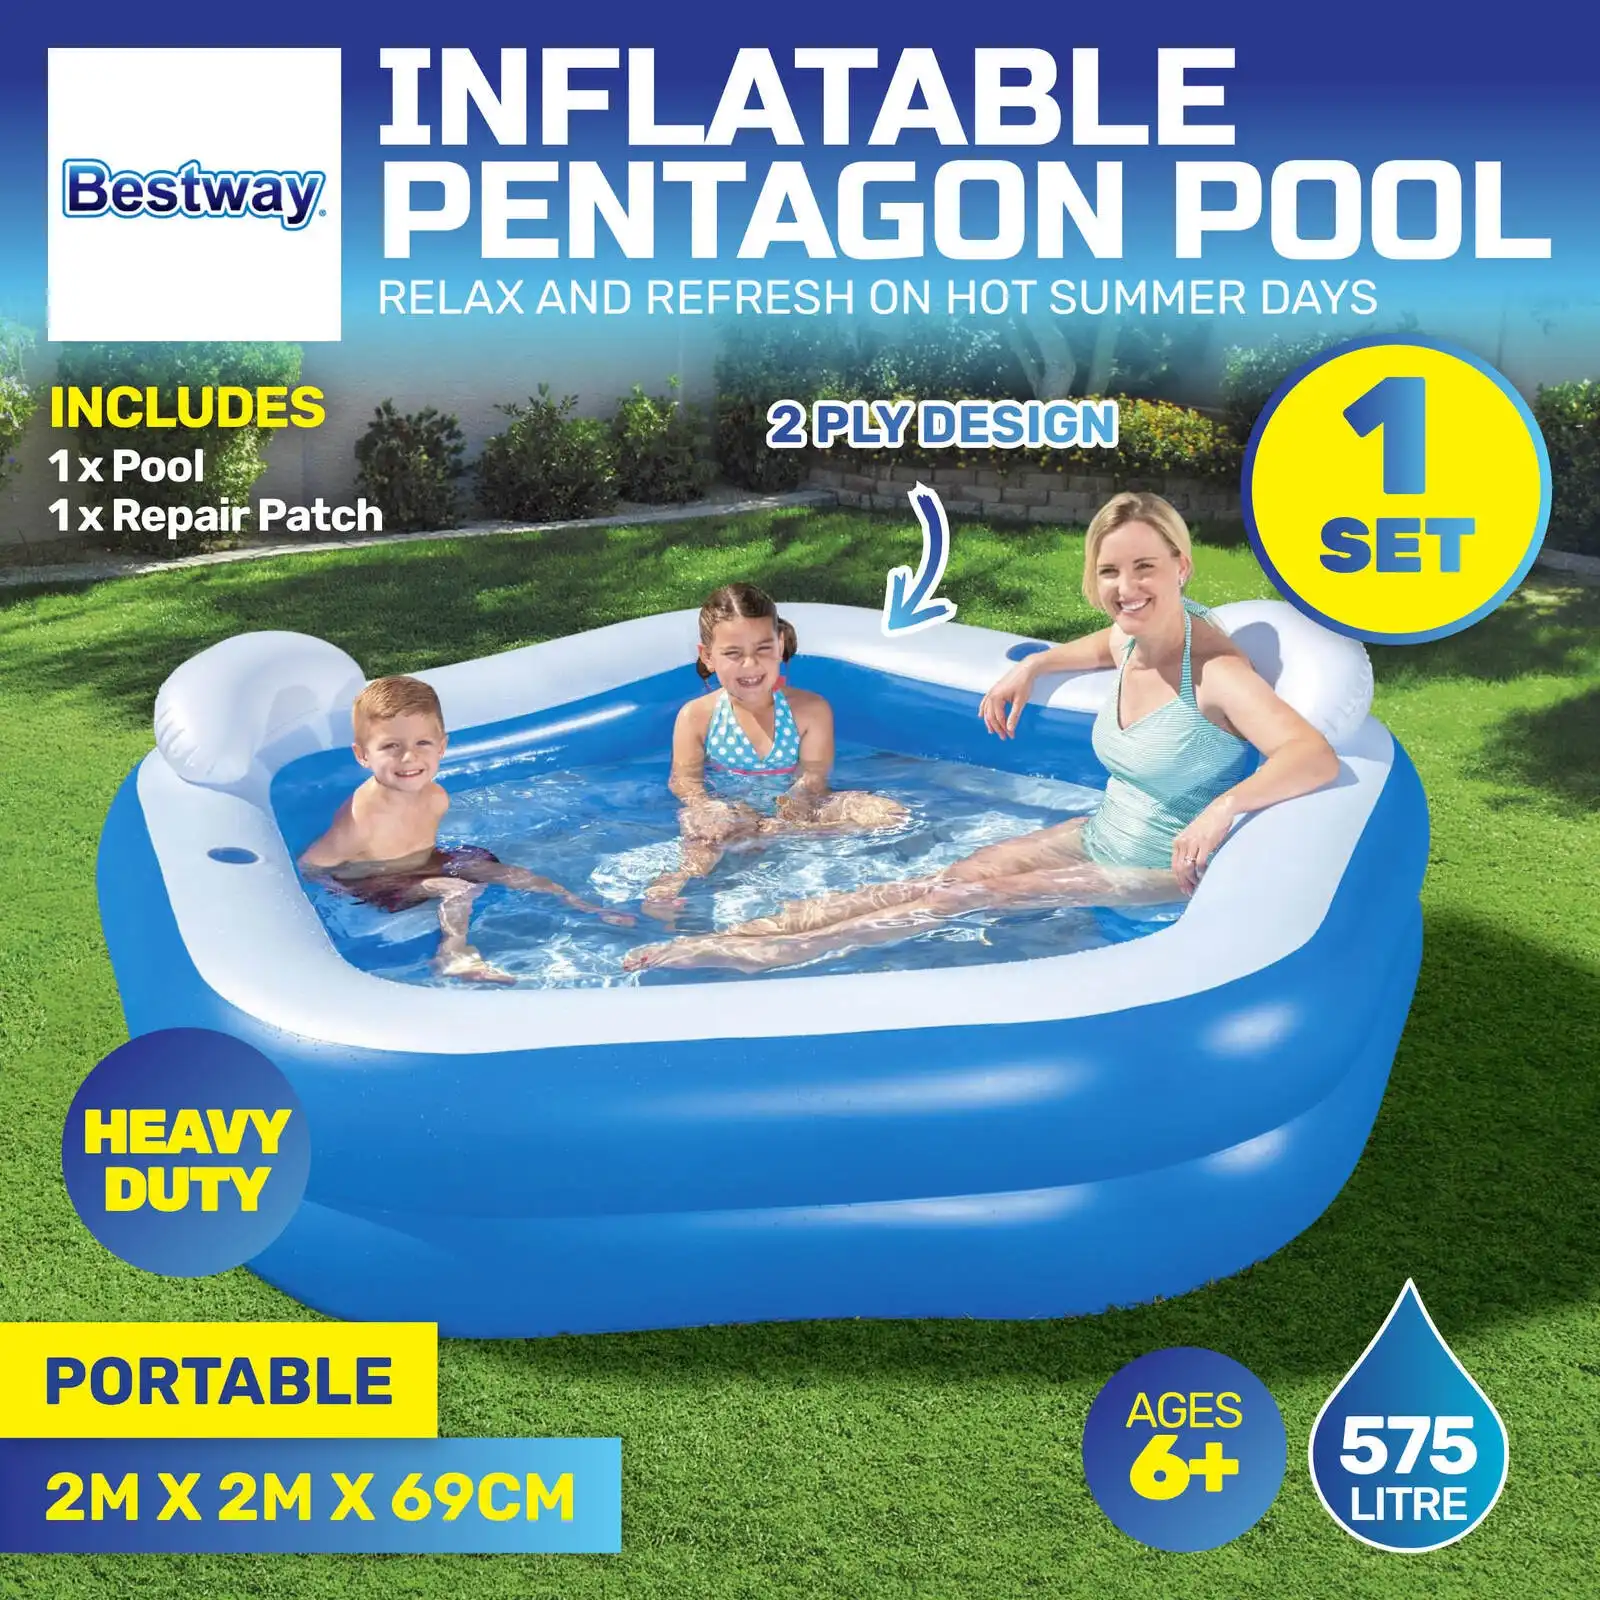 Bestway® Inflatable Pentagon Shaped Pool Fitted With Headrests & Seats 575L